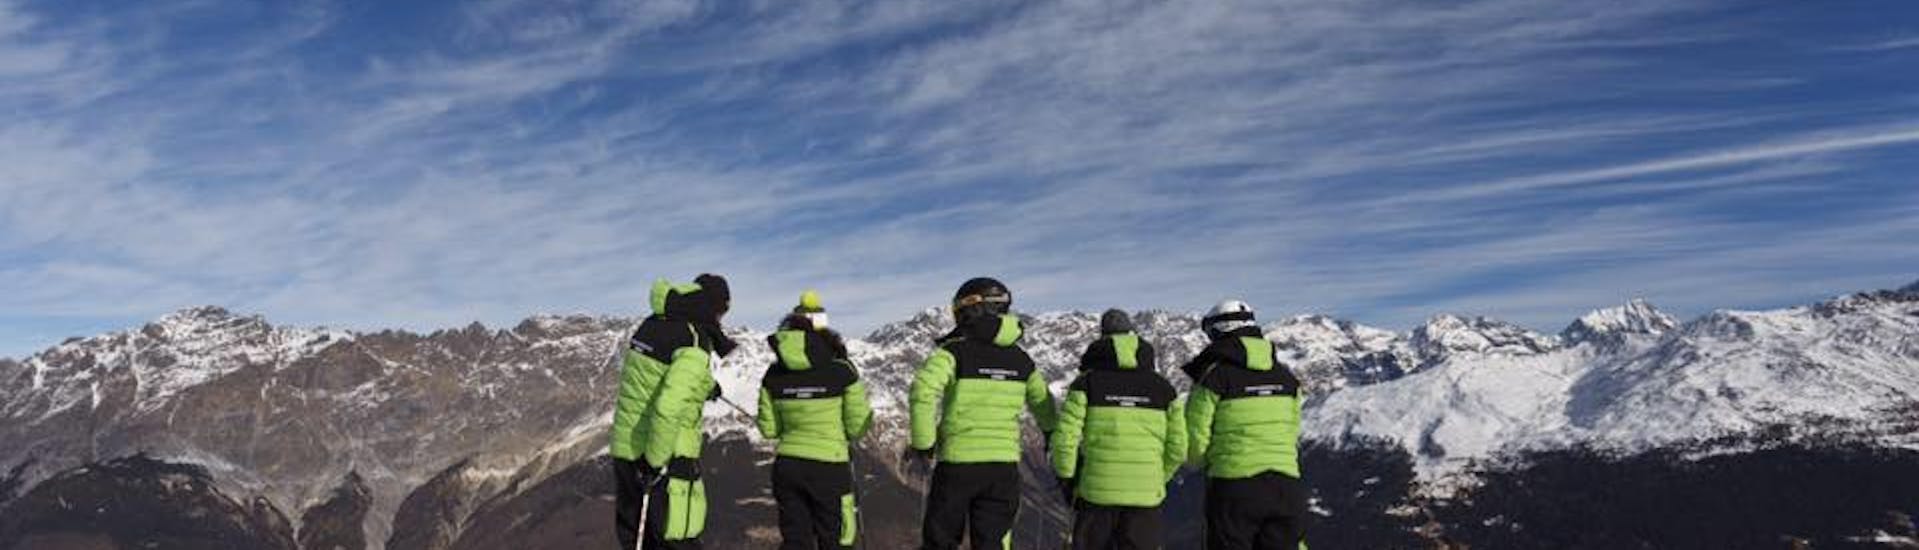 Ski instructors in front of the mountains in Bormio before one of the Private Ski Lessons for Kids of All Levels & Ages.